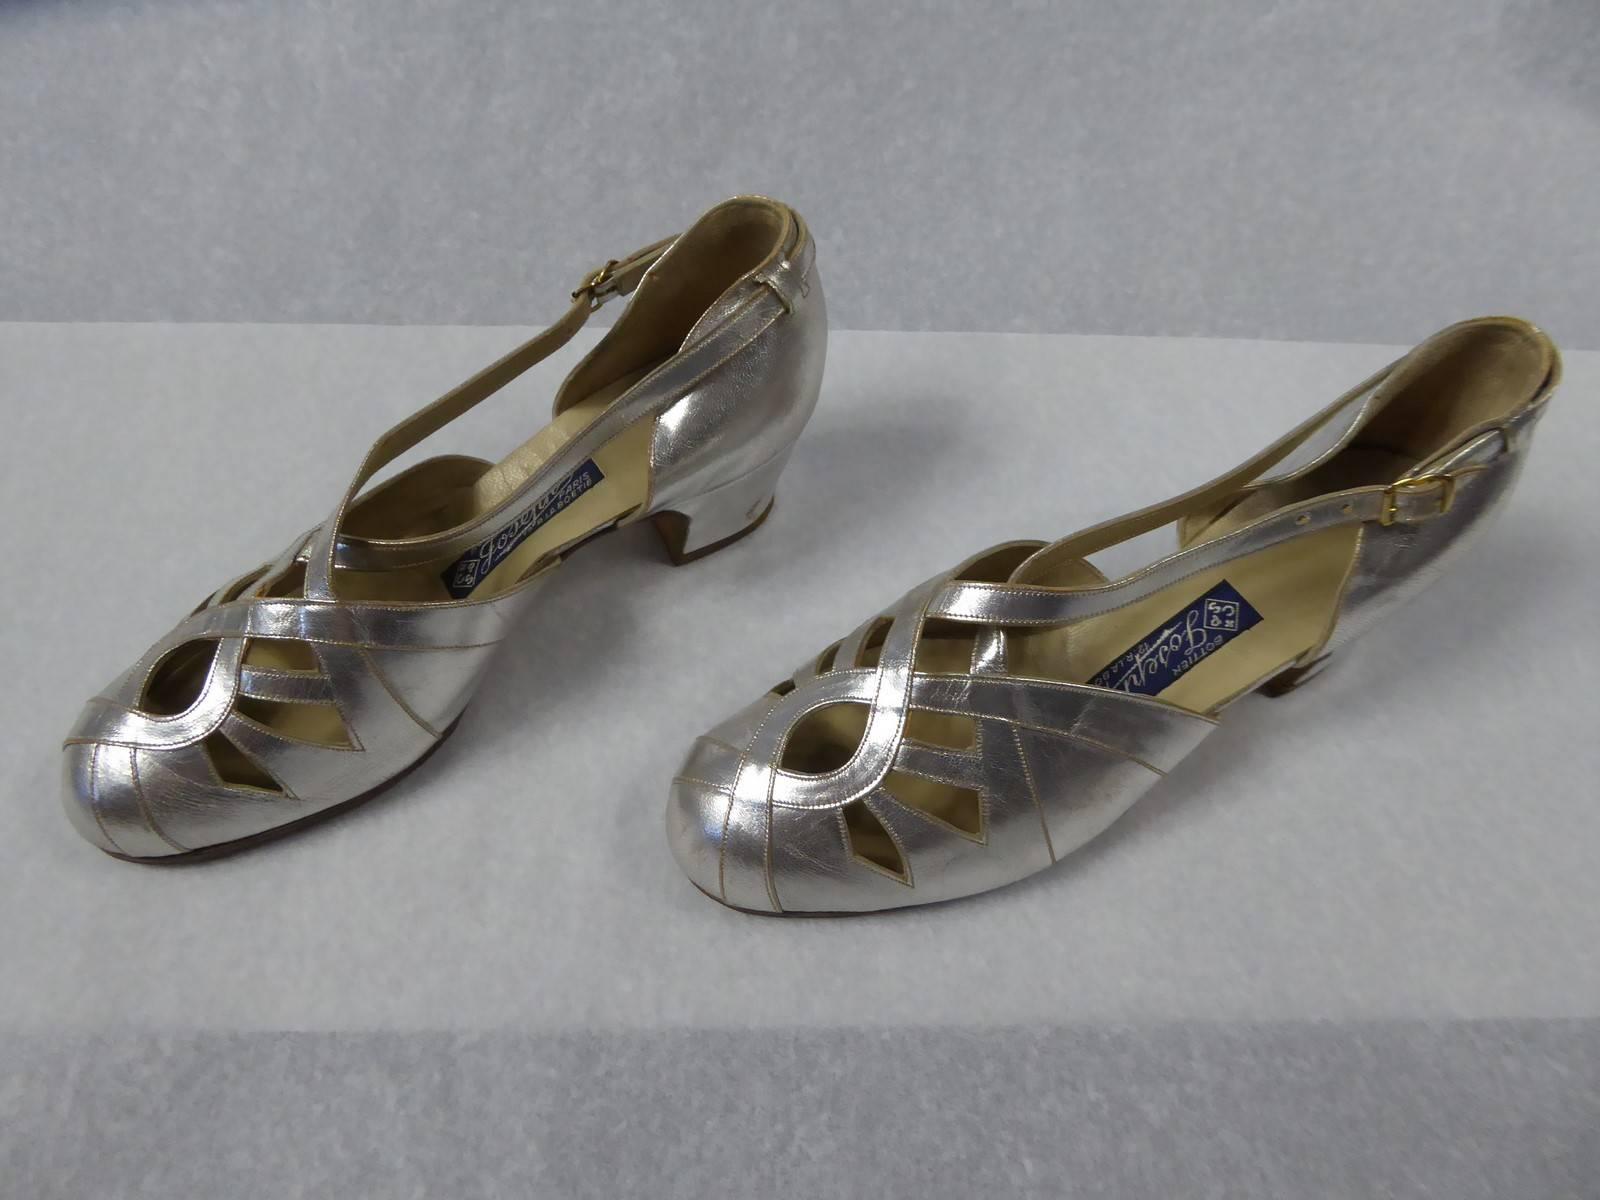 Circa 1930/1940

France

A pair of Salomé shoes in cream and silver leather from the 1930/1940. The work of a parisian bootmaker, tag saying CPS Bottier Joseph, Paris 12 rue La Boétie. Openwork effect on the top, finished by a strap and buckle at